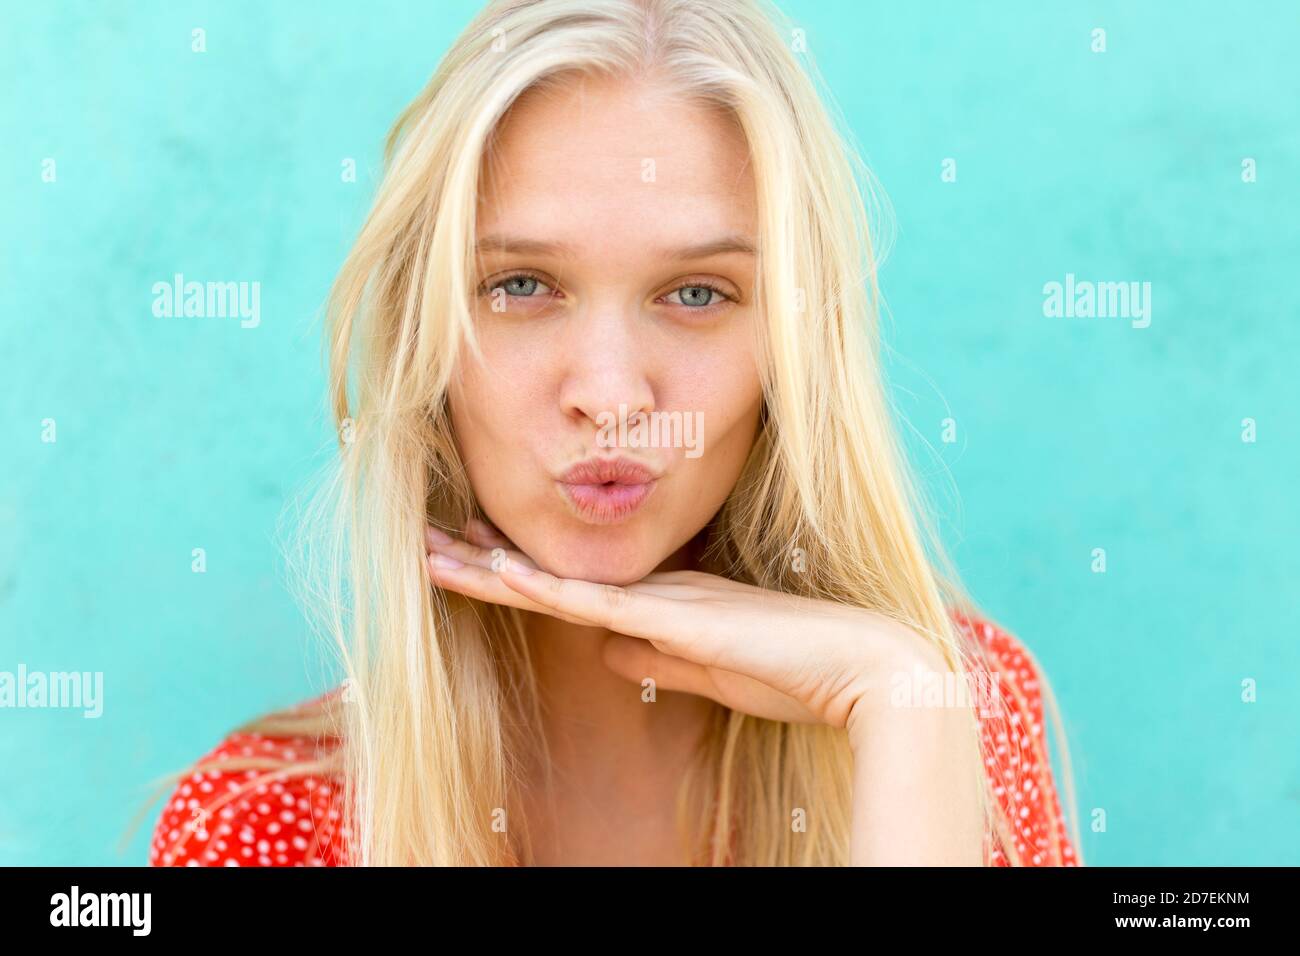 Portrait of beautiful young blonde woman giving a kiss and posing to the camera isolated against a turquoise background. Stock Photo